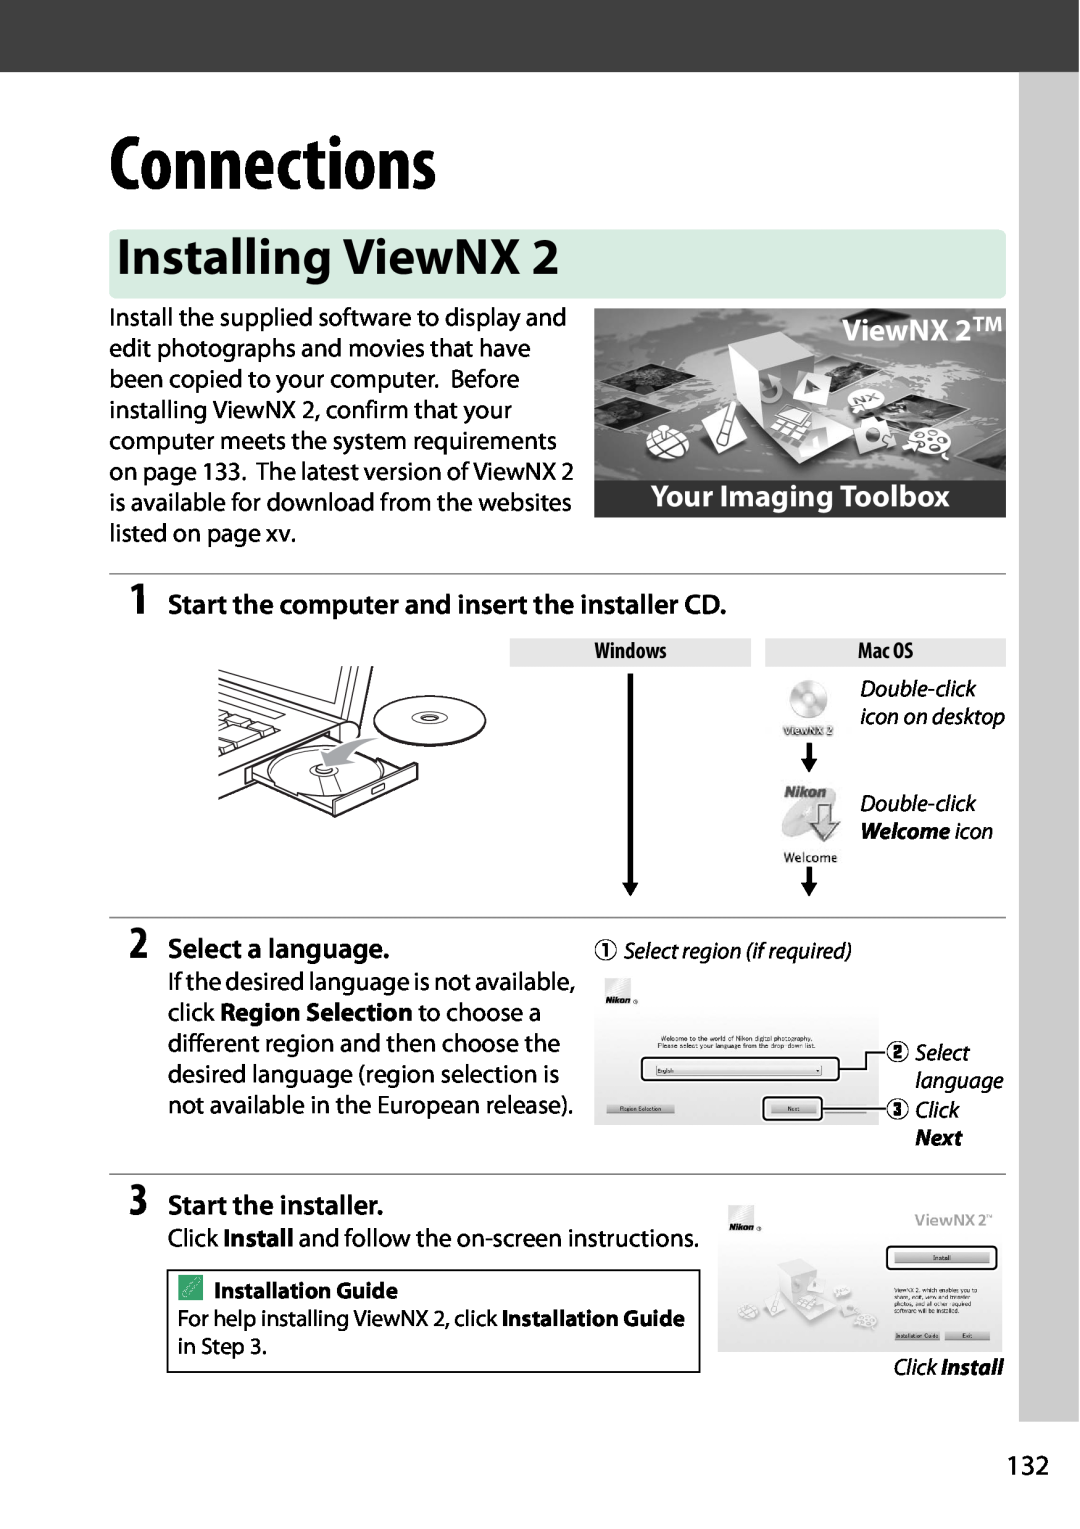 Nikon 1503 Connections, Installing ViewNX, Start the computer and insert the installer CD, Select a language, w Select 